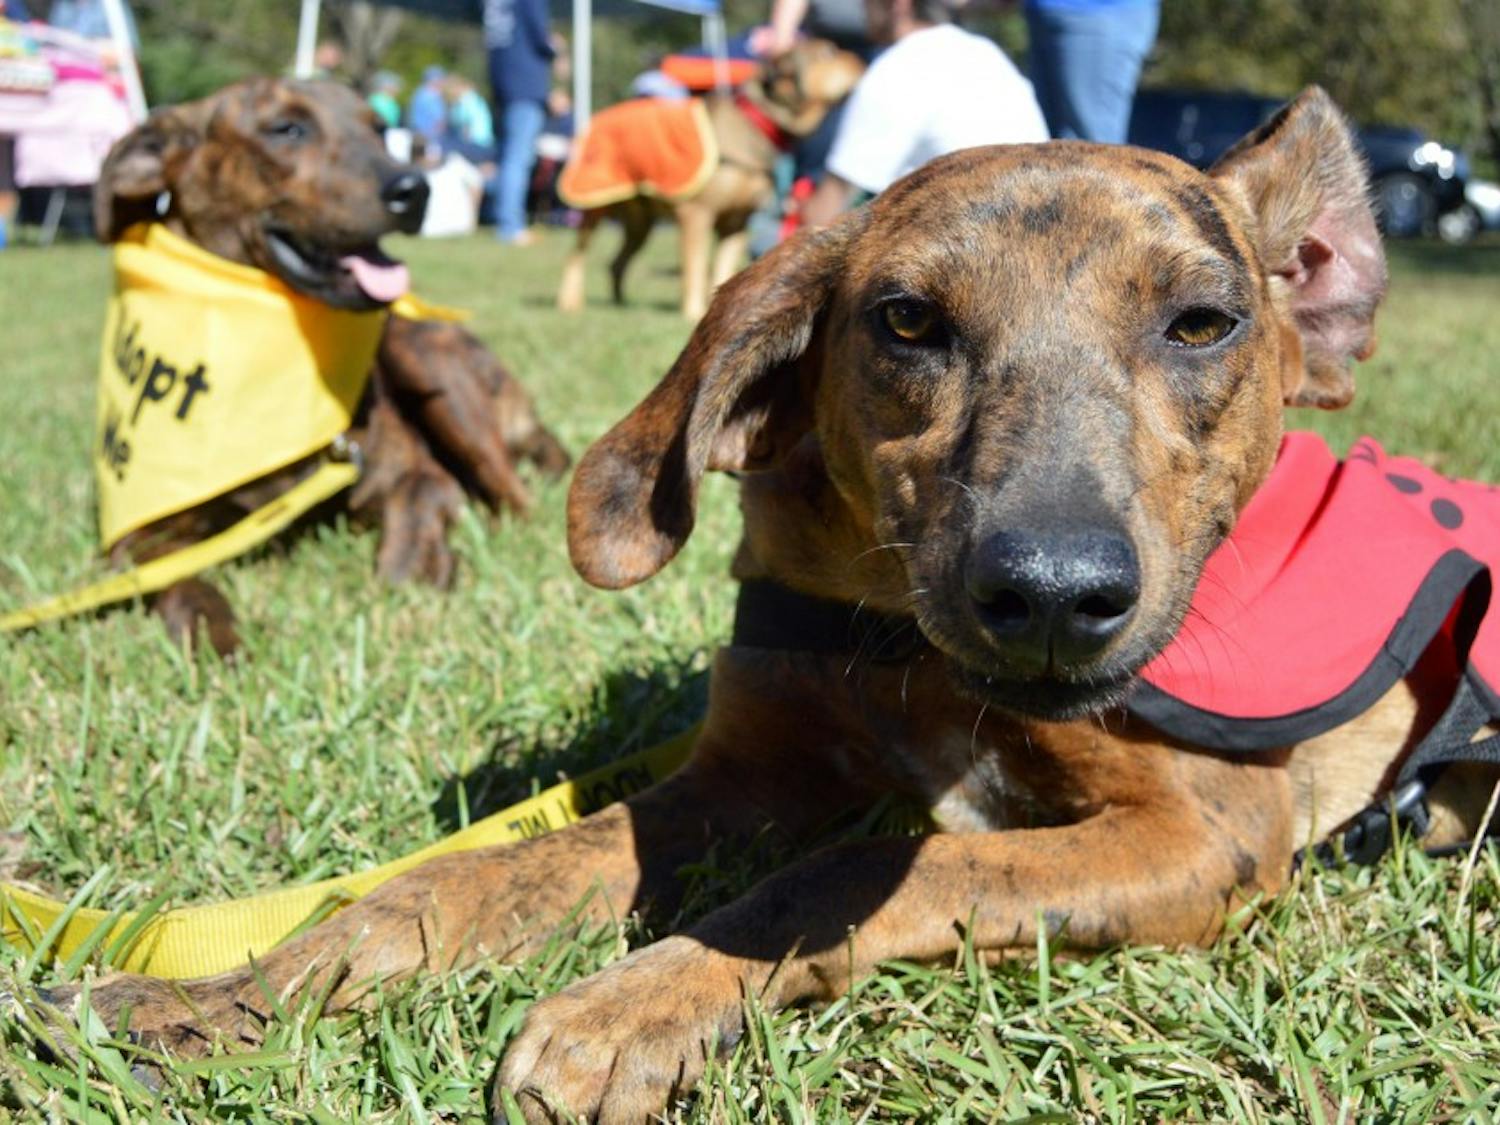 Pookie and Noah, puppies available for adoption through Macon County Humane Society, lie in the grass during&nbsp;Woofstock at Kiesel Park in Auburn, Alabama, on Oct. 17, 2015.